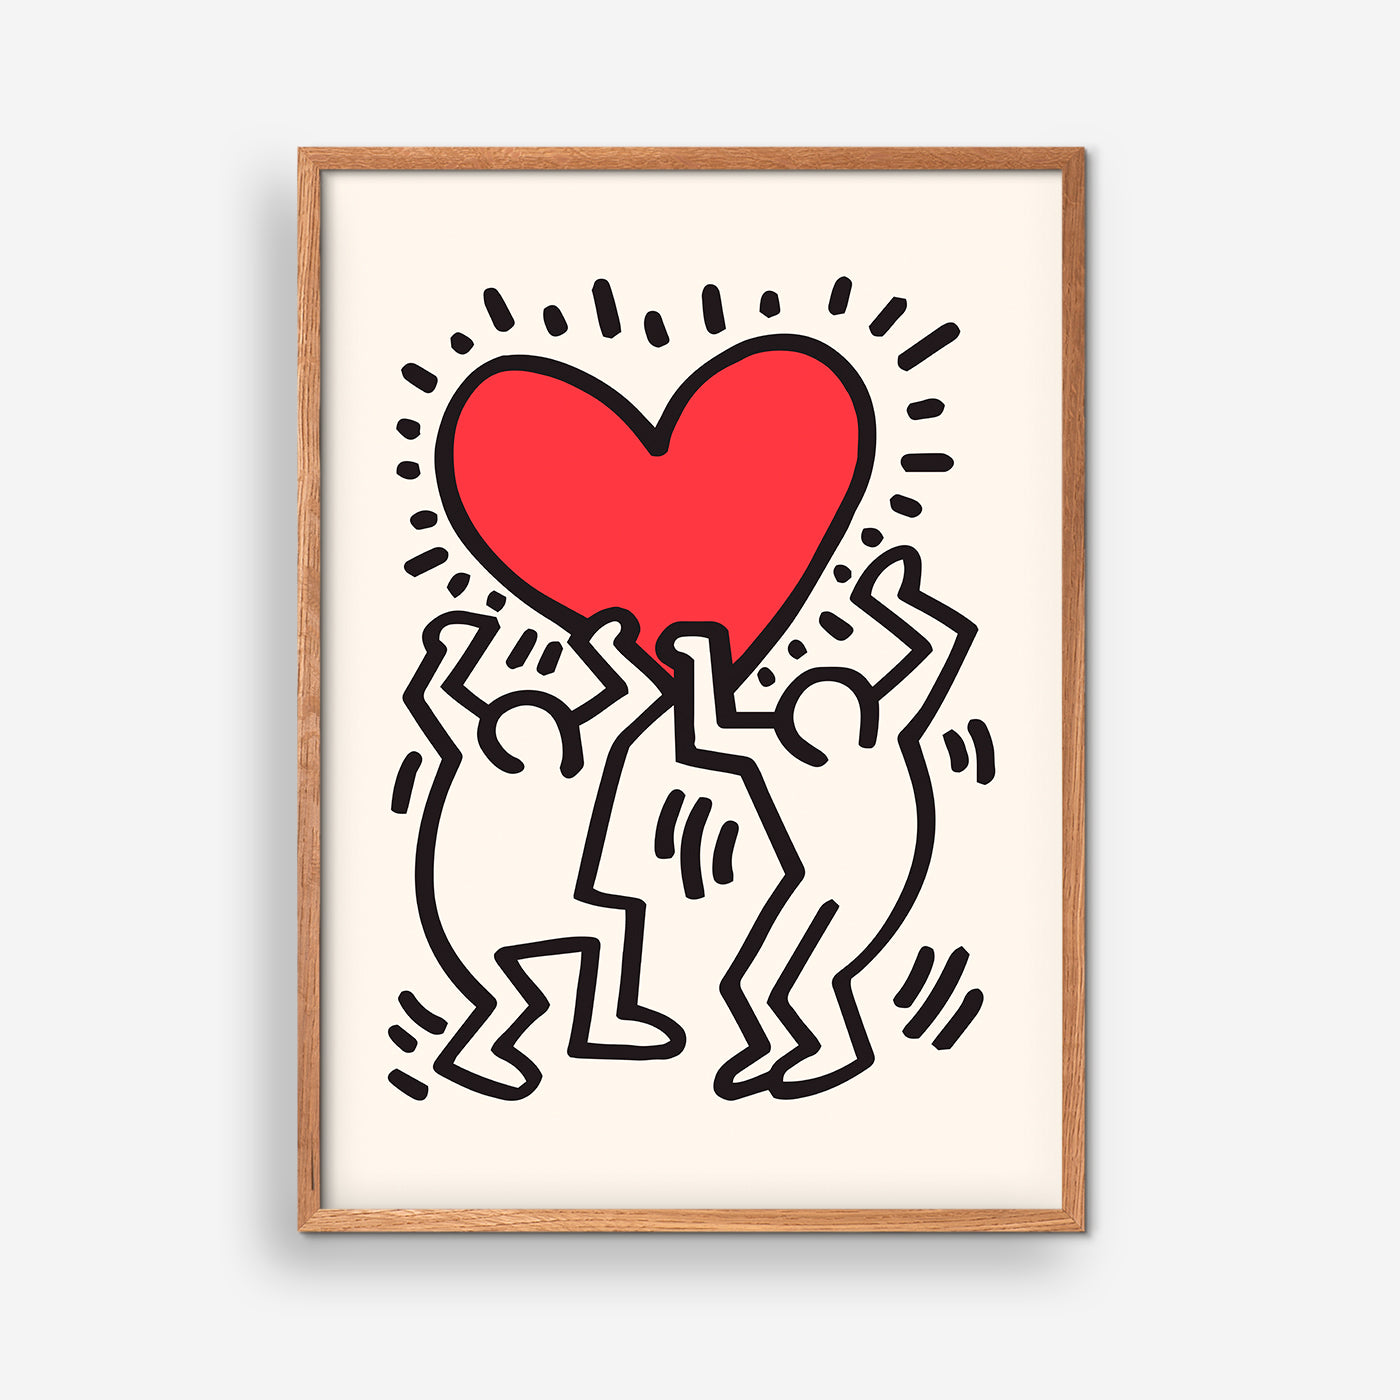 Two Figures - Keith Haring